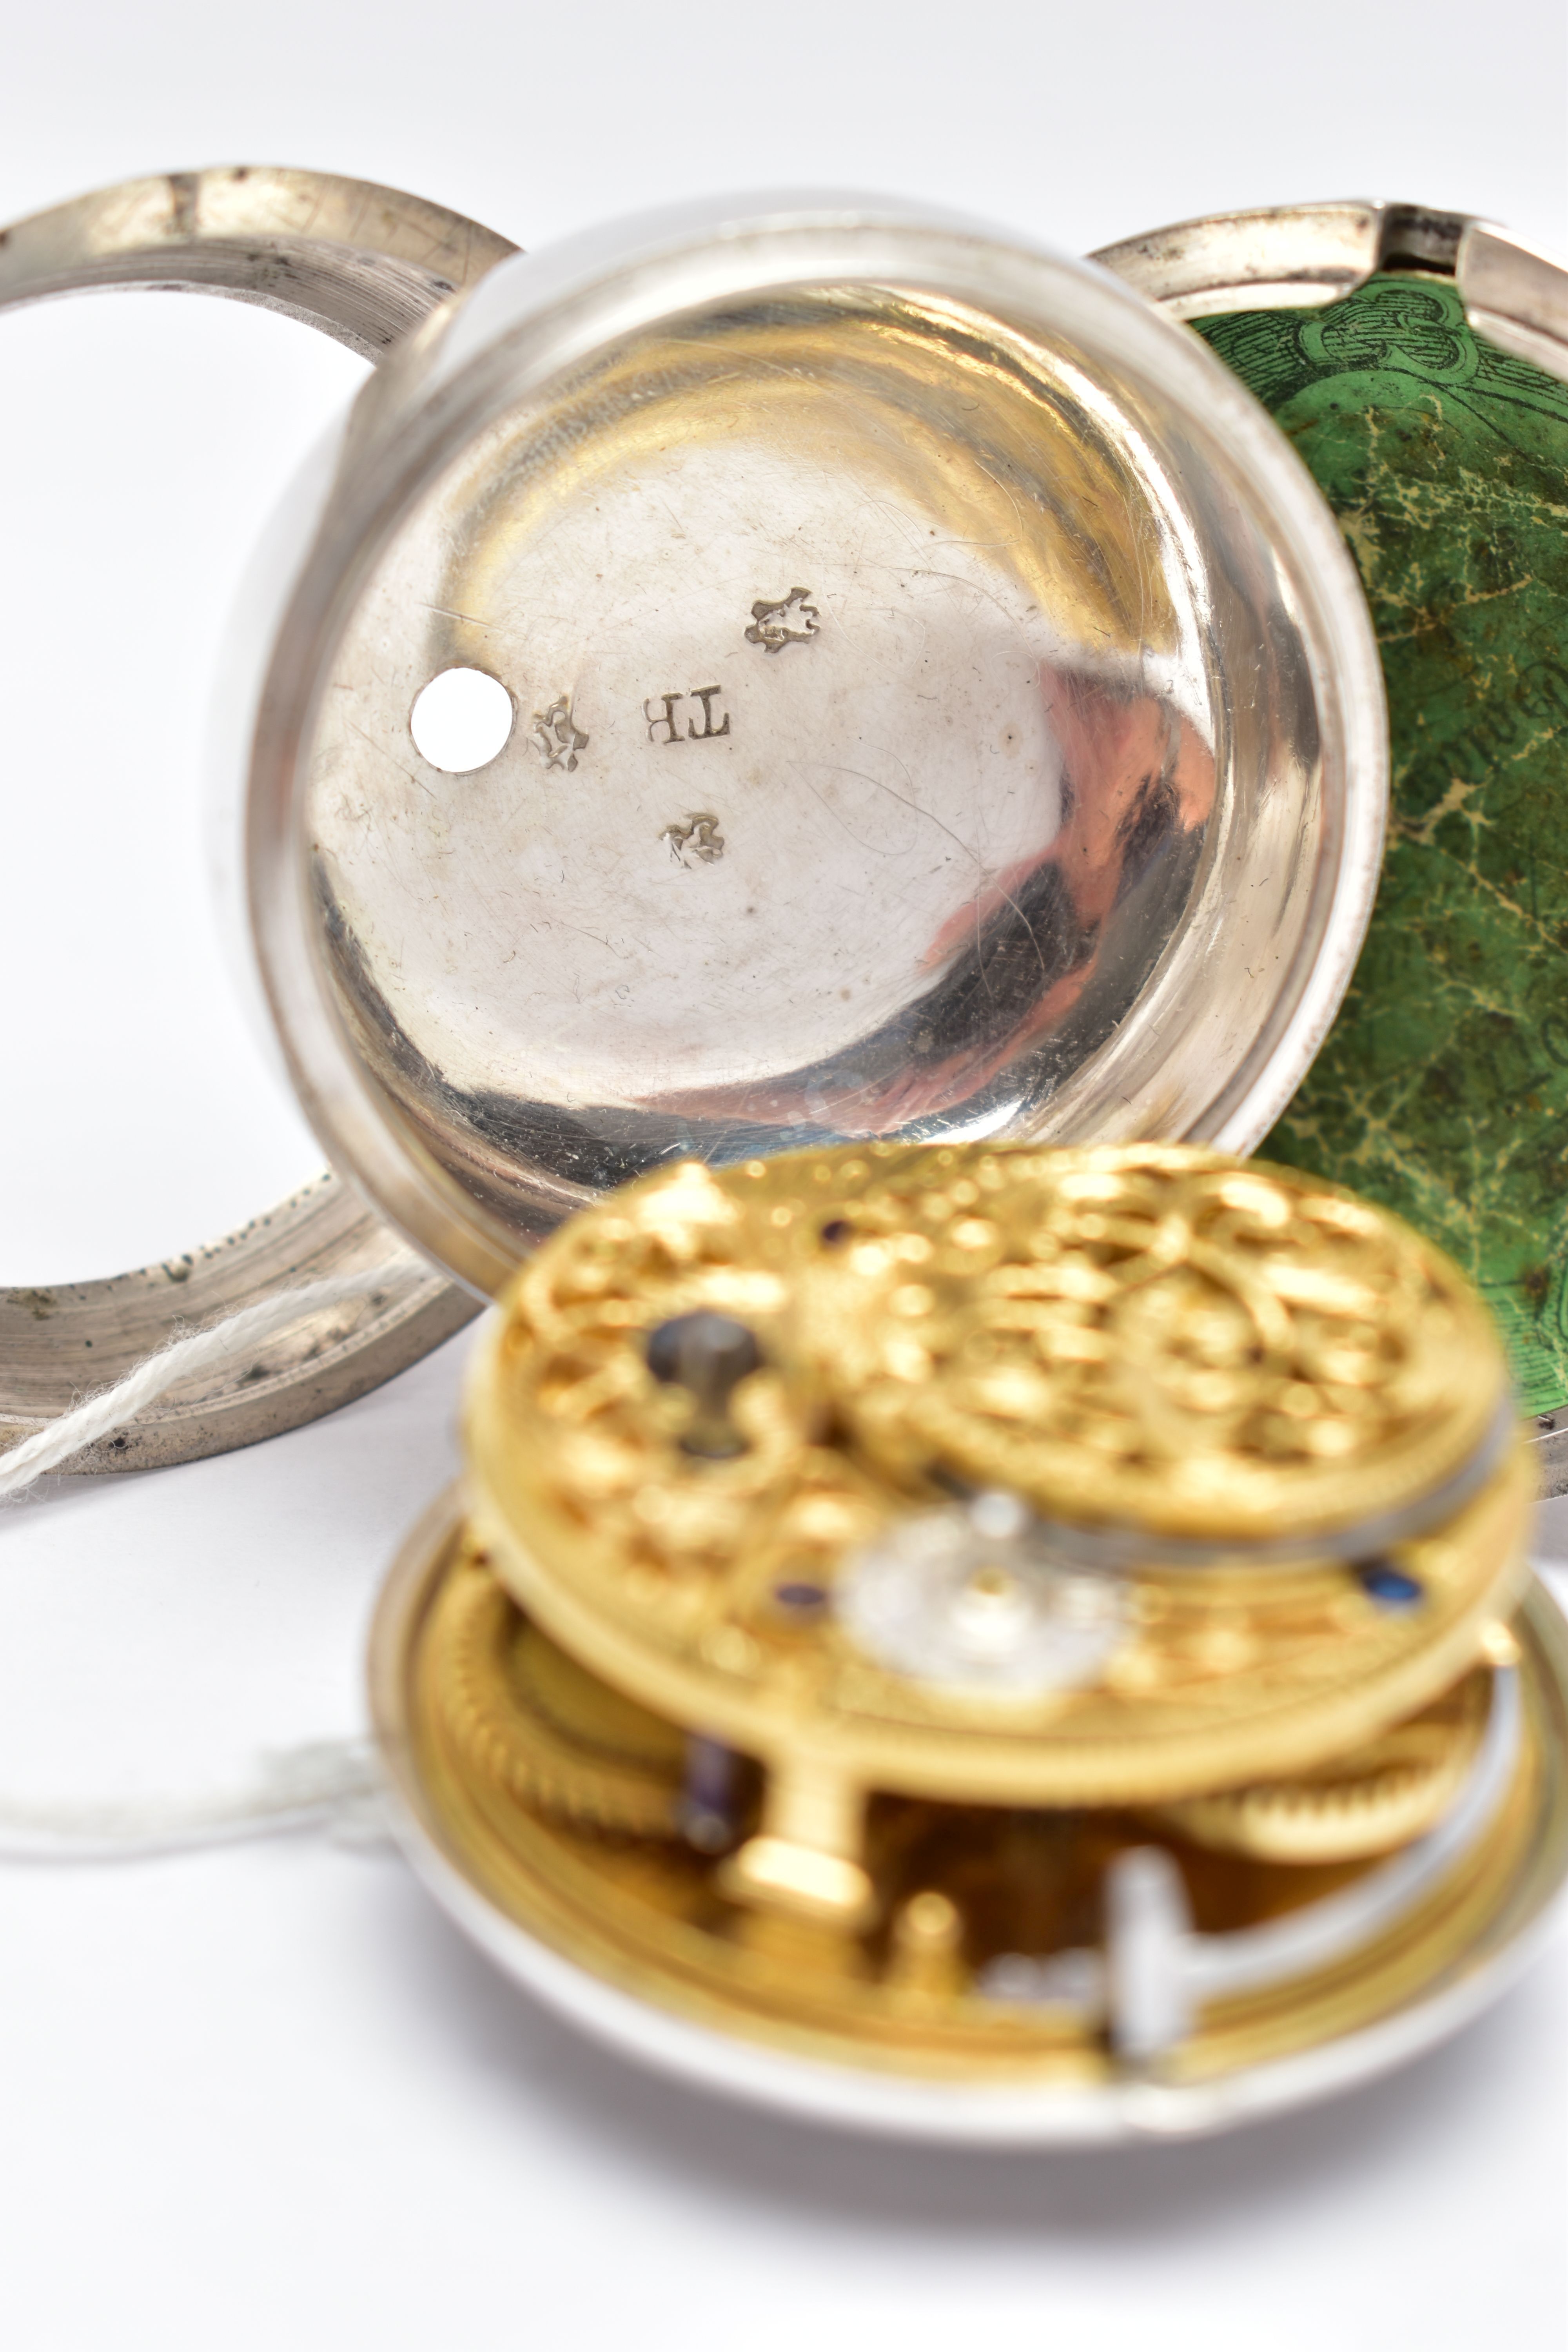 A GEORGE II SILVER PAIR CASED VERGE POCKET WATCH BY 'THOMAS BECKETT', key wound, round champleve - Image 9 of 11